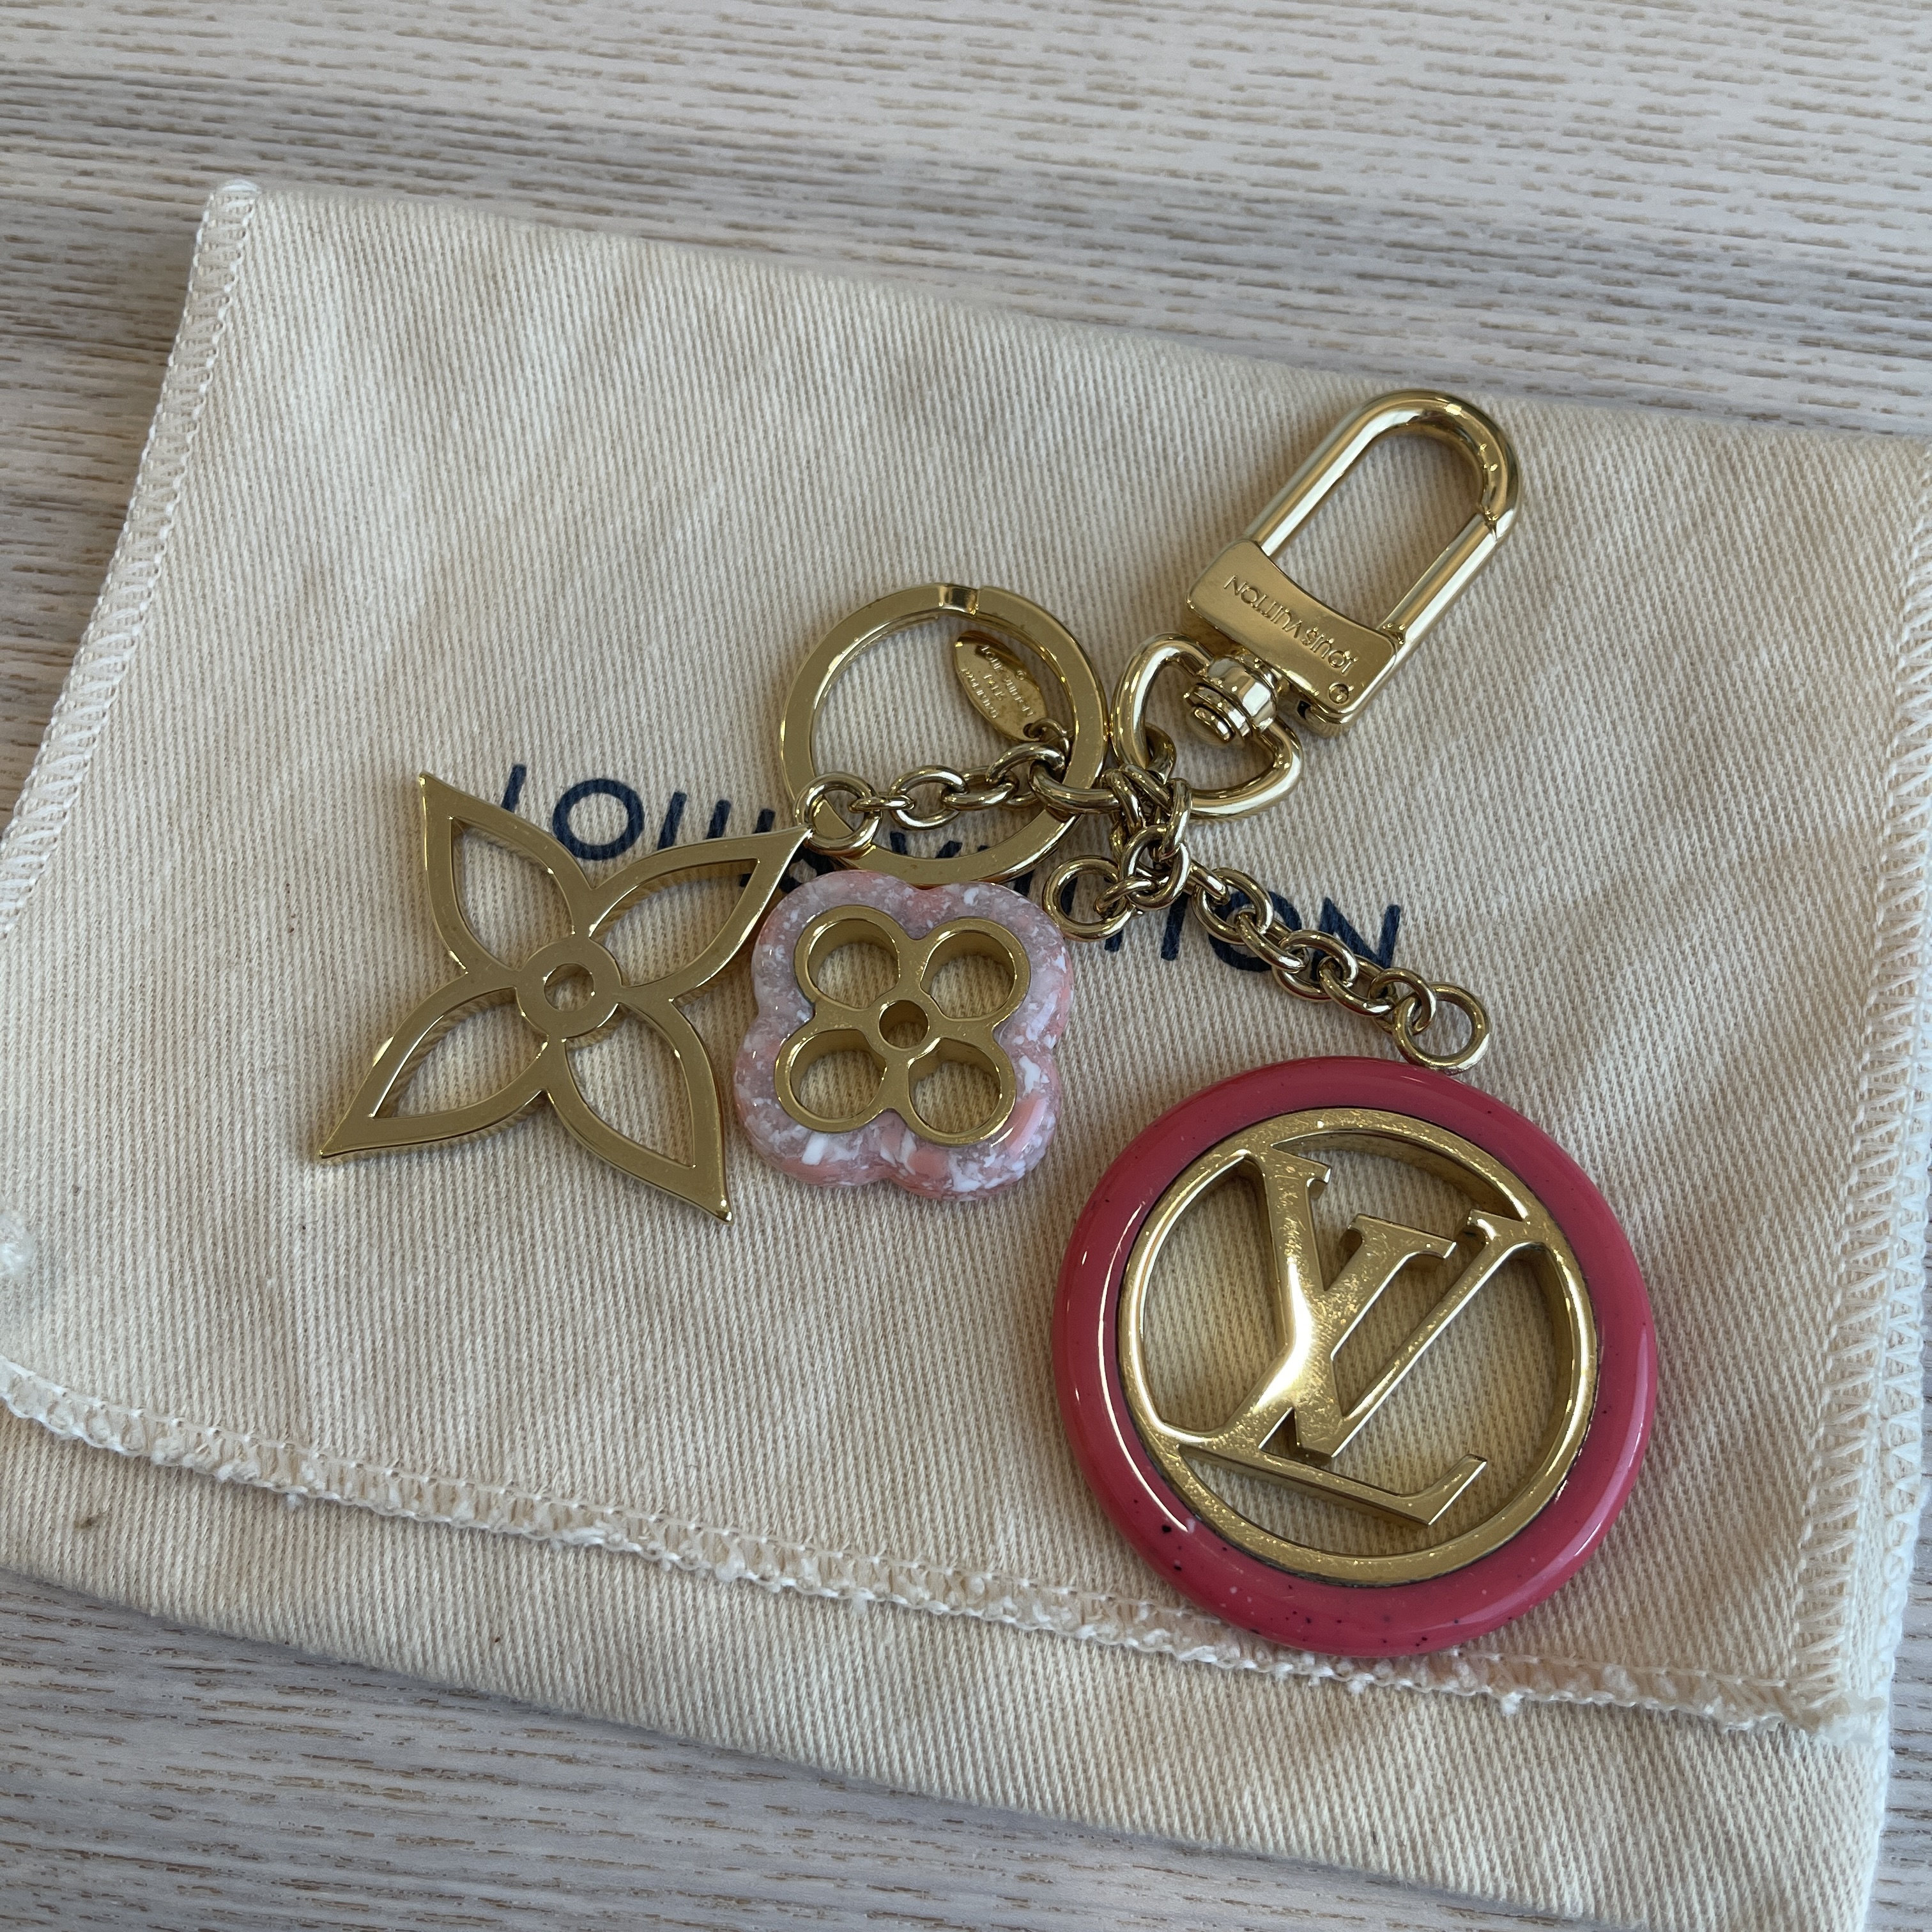 Colorline Bag Charm and Key Holder S00 - Accessories